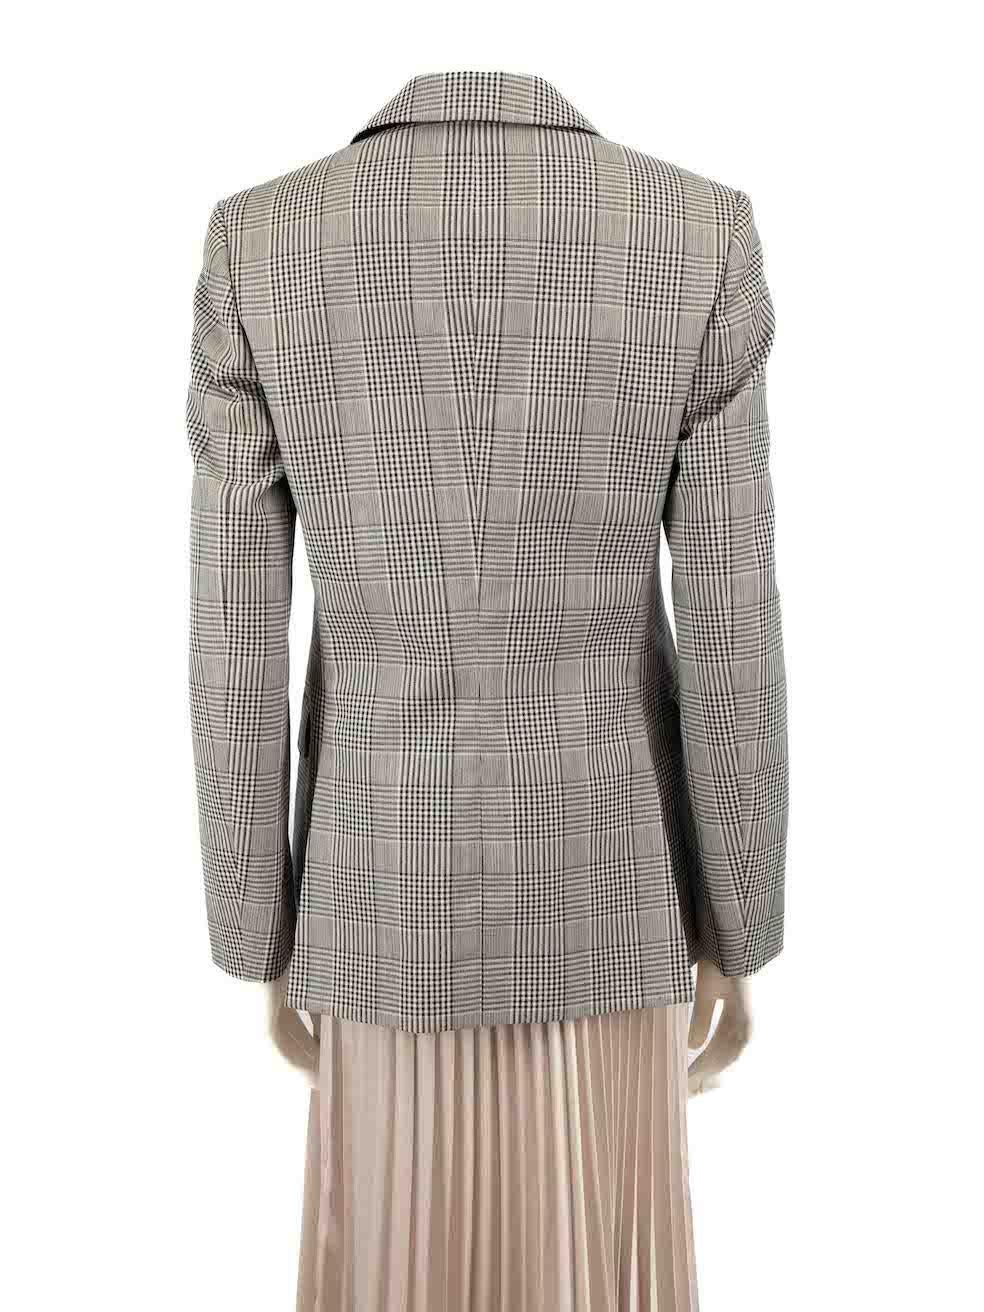 Burberry Grey Wool Check Tailored Blazer Jacket Size S In New Condition For Sale In London, GB